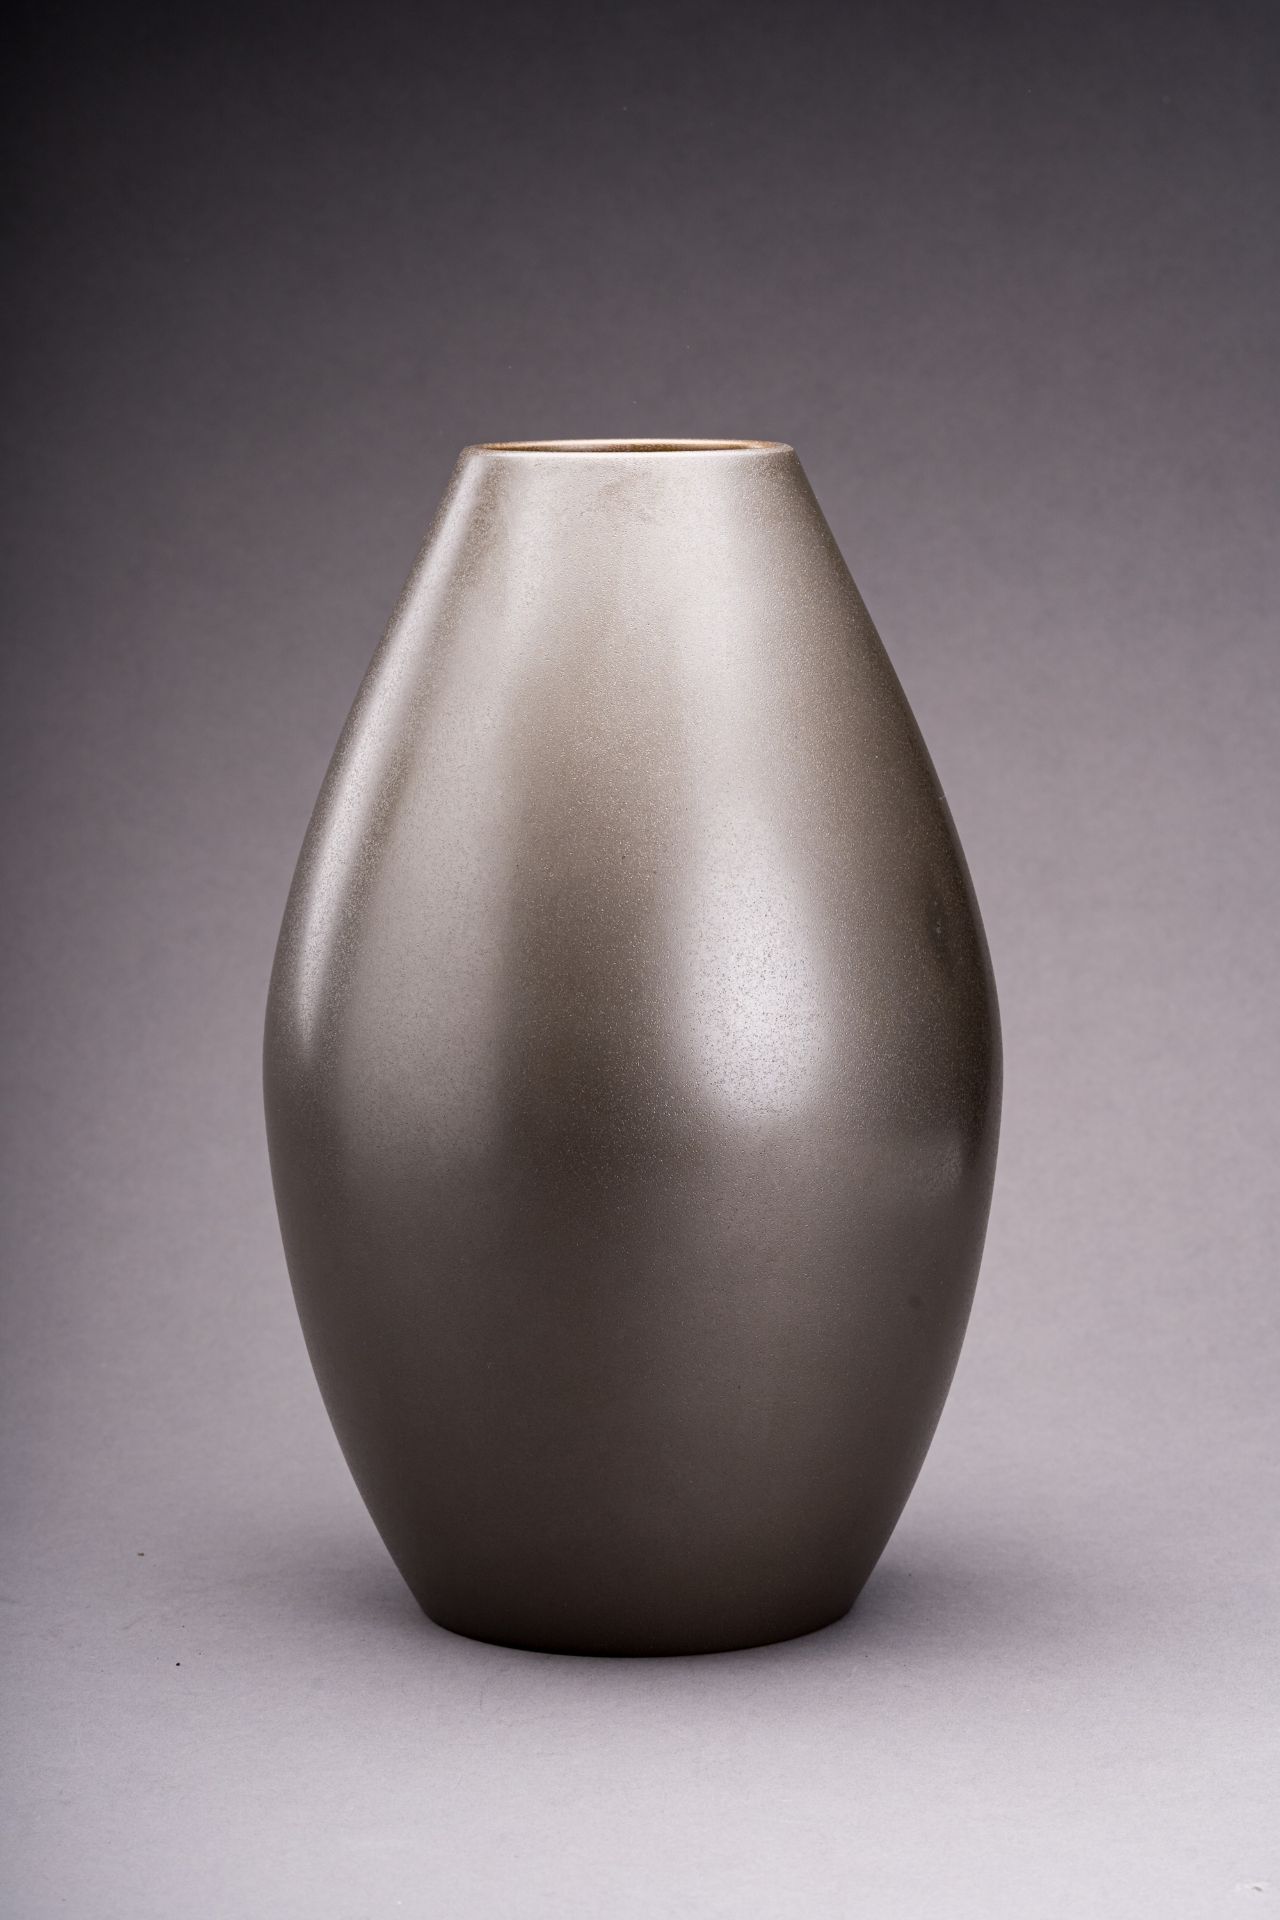 A SILVER AND BRONZE PATINATED VASE, BY ARISU BIZAN (BORN 1937) - Image 5 of 10